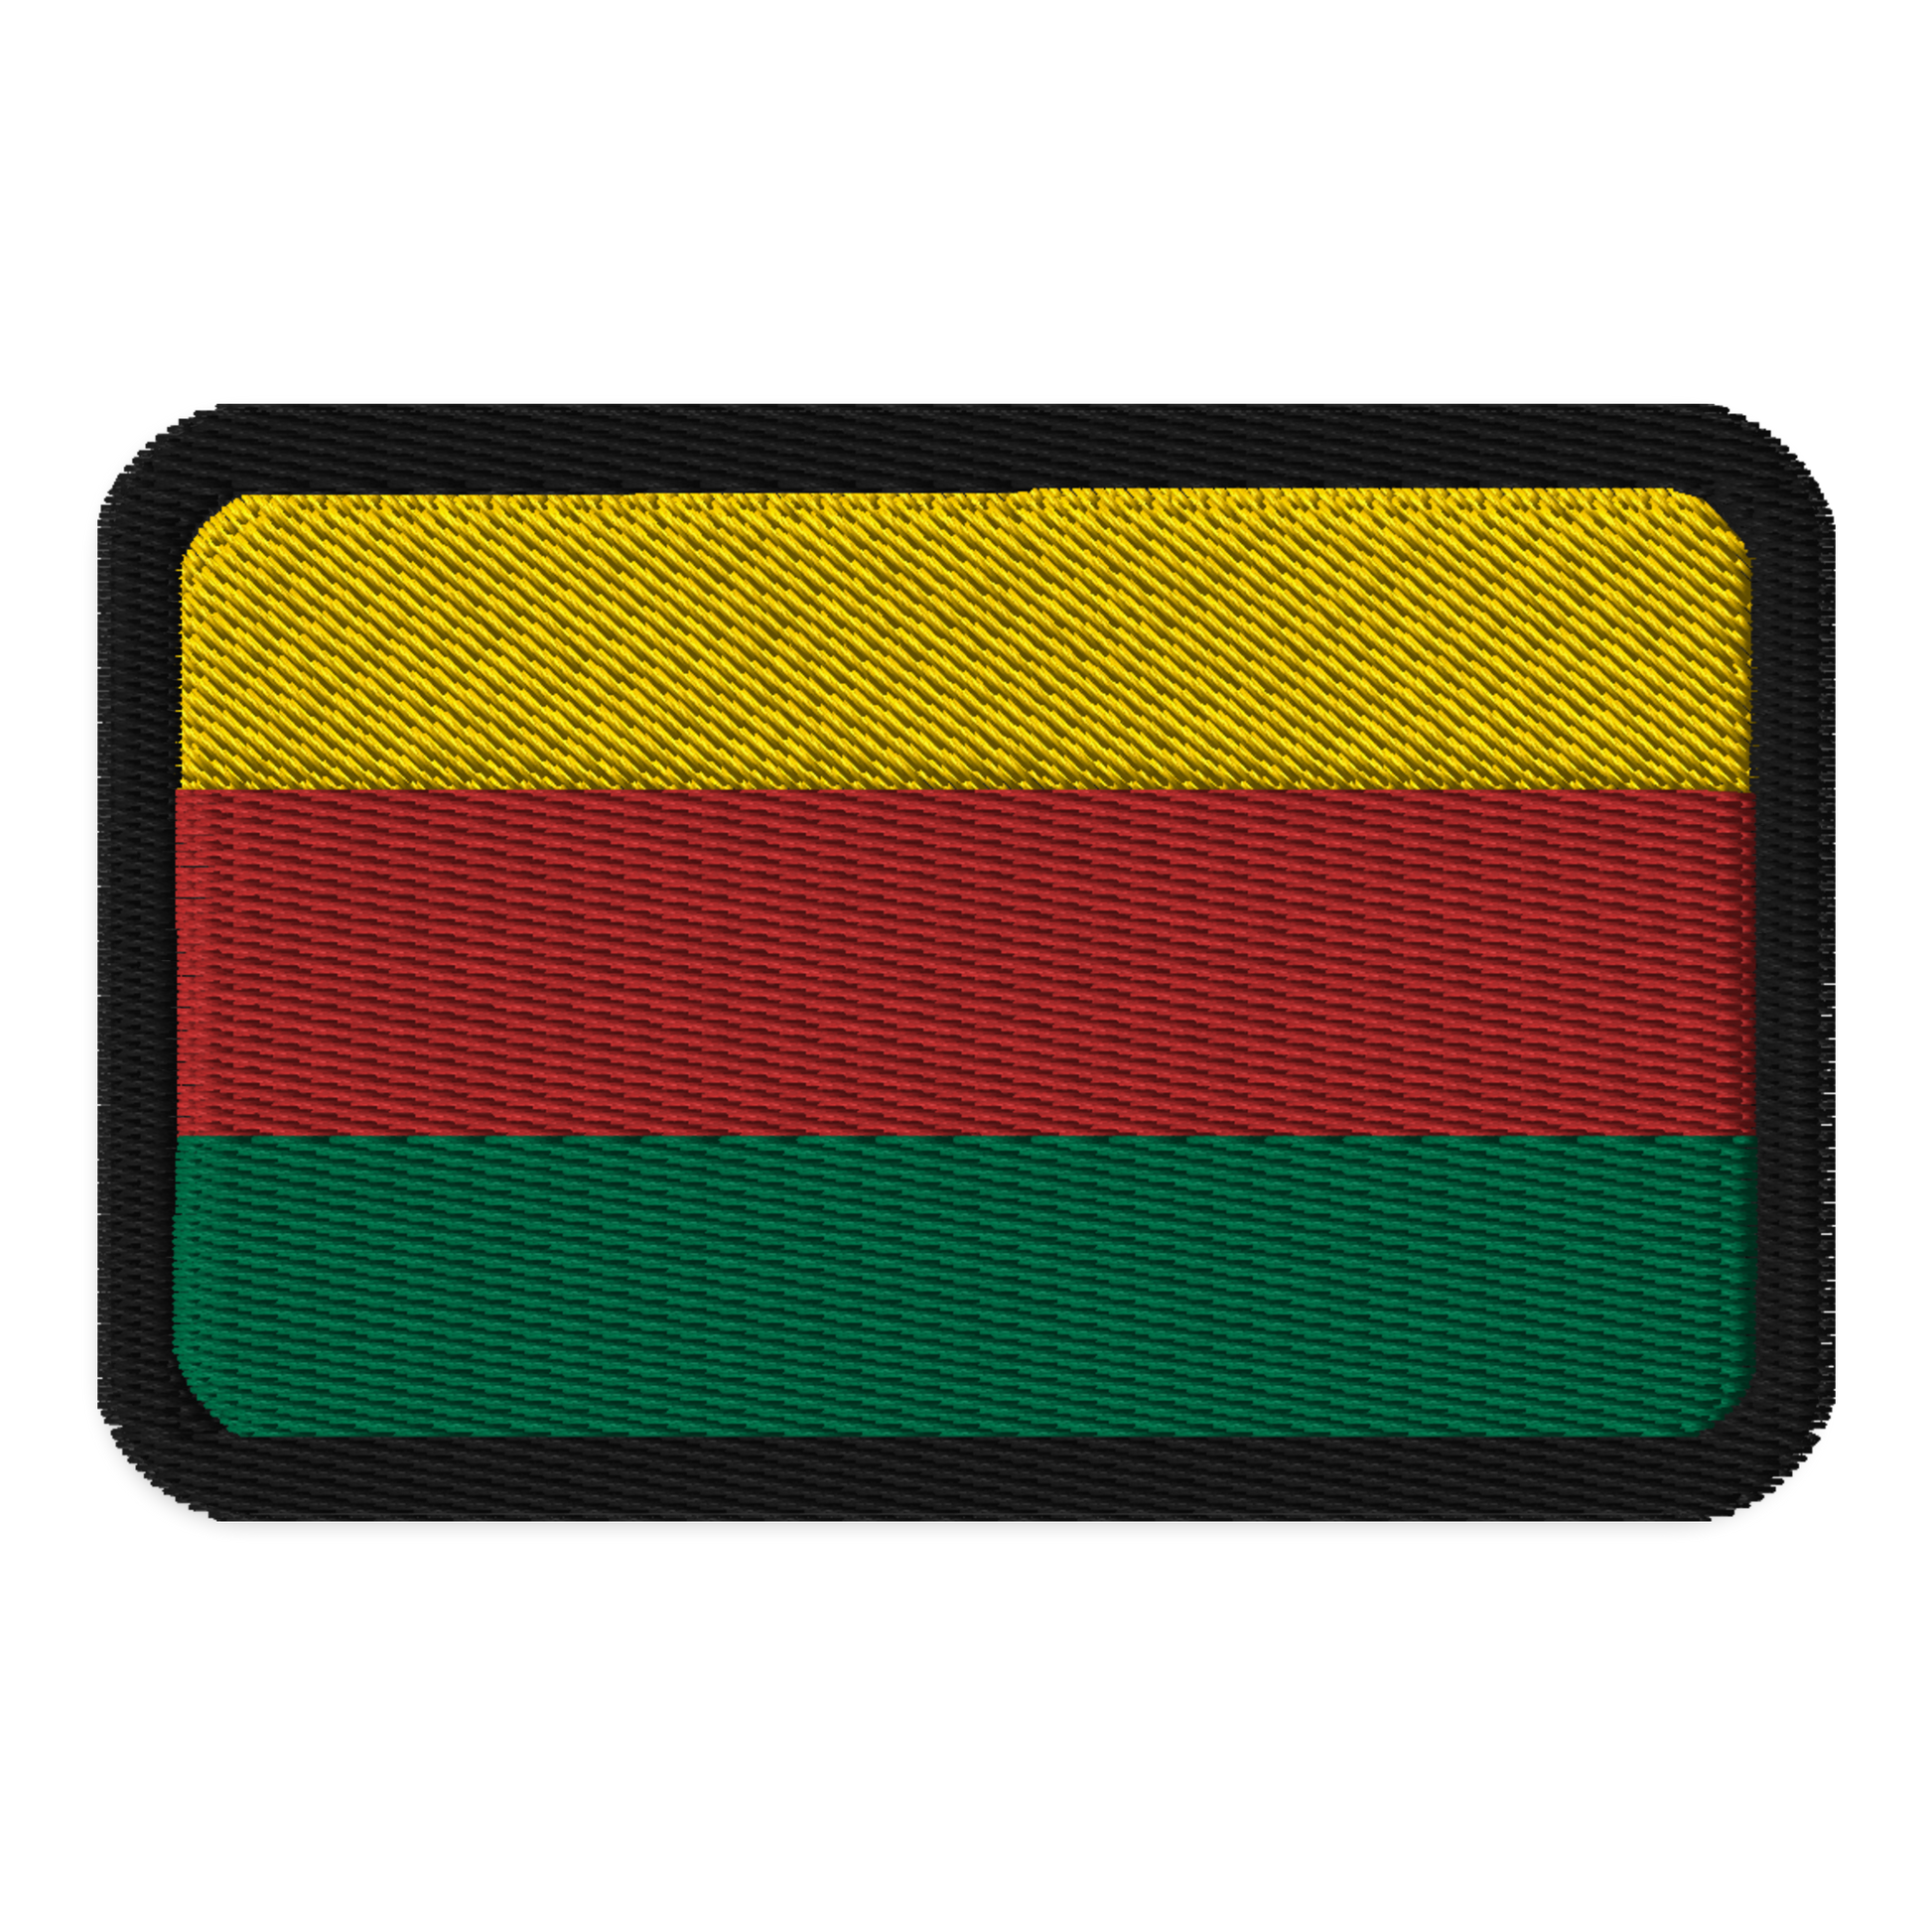 Embroidered Flag Patches, Country and Regional Flag Patches